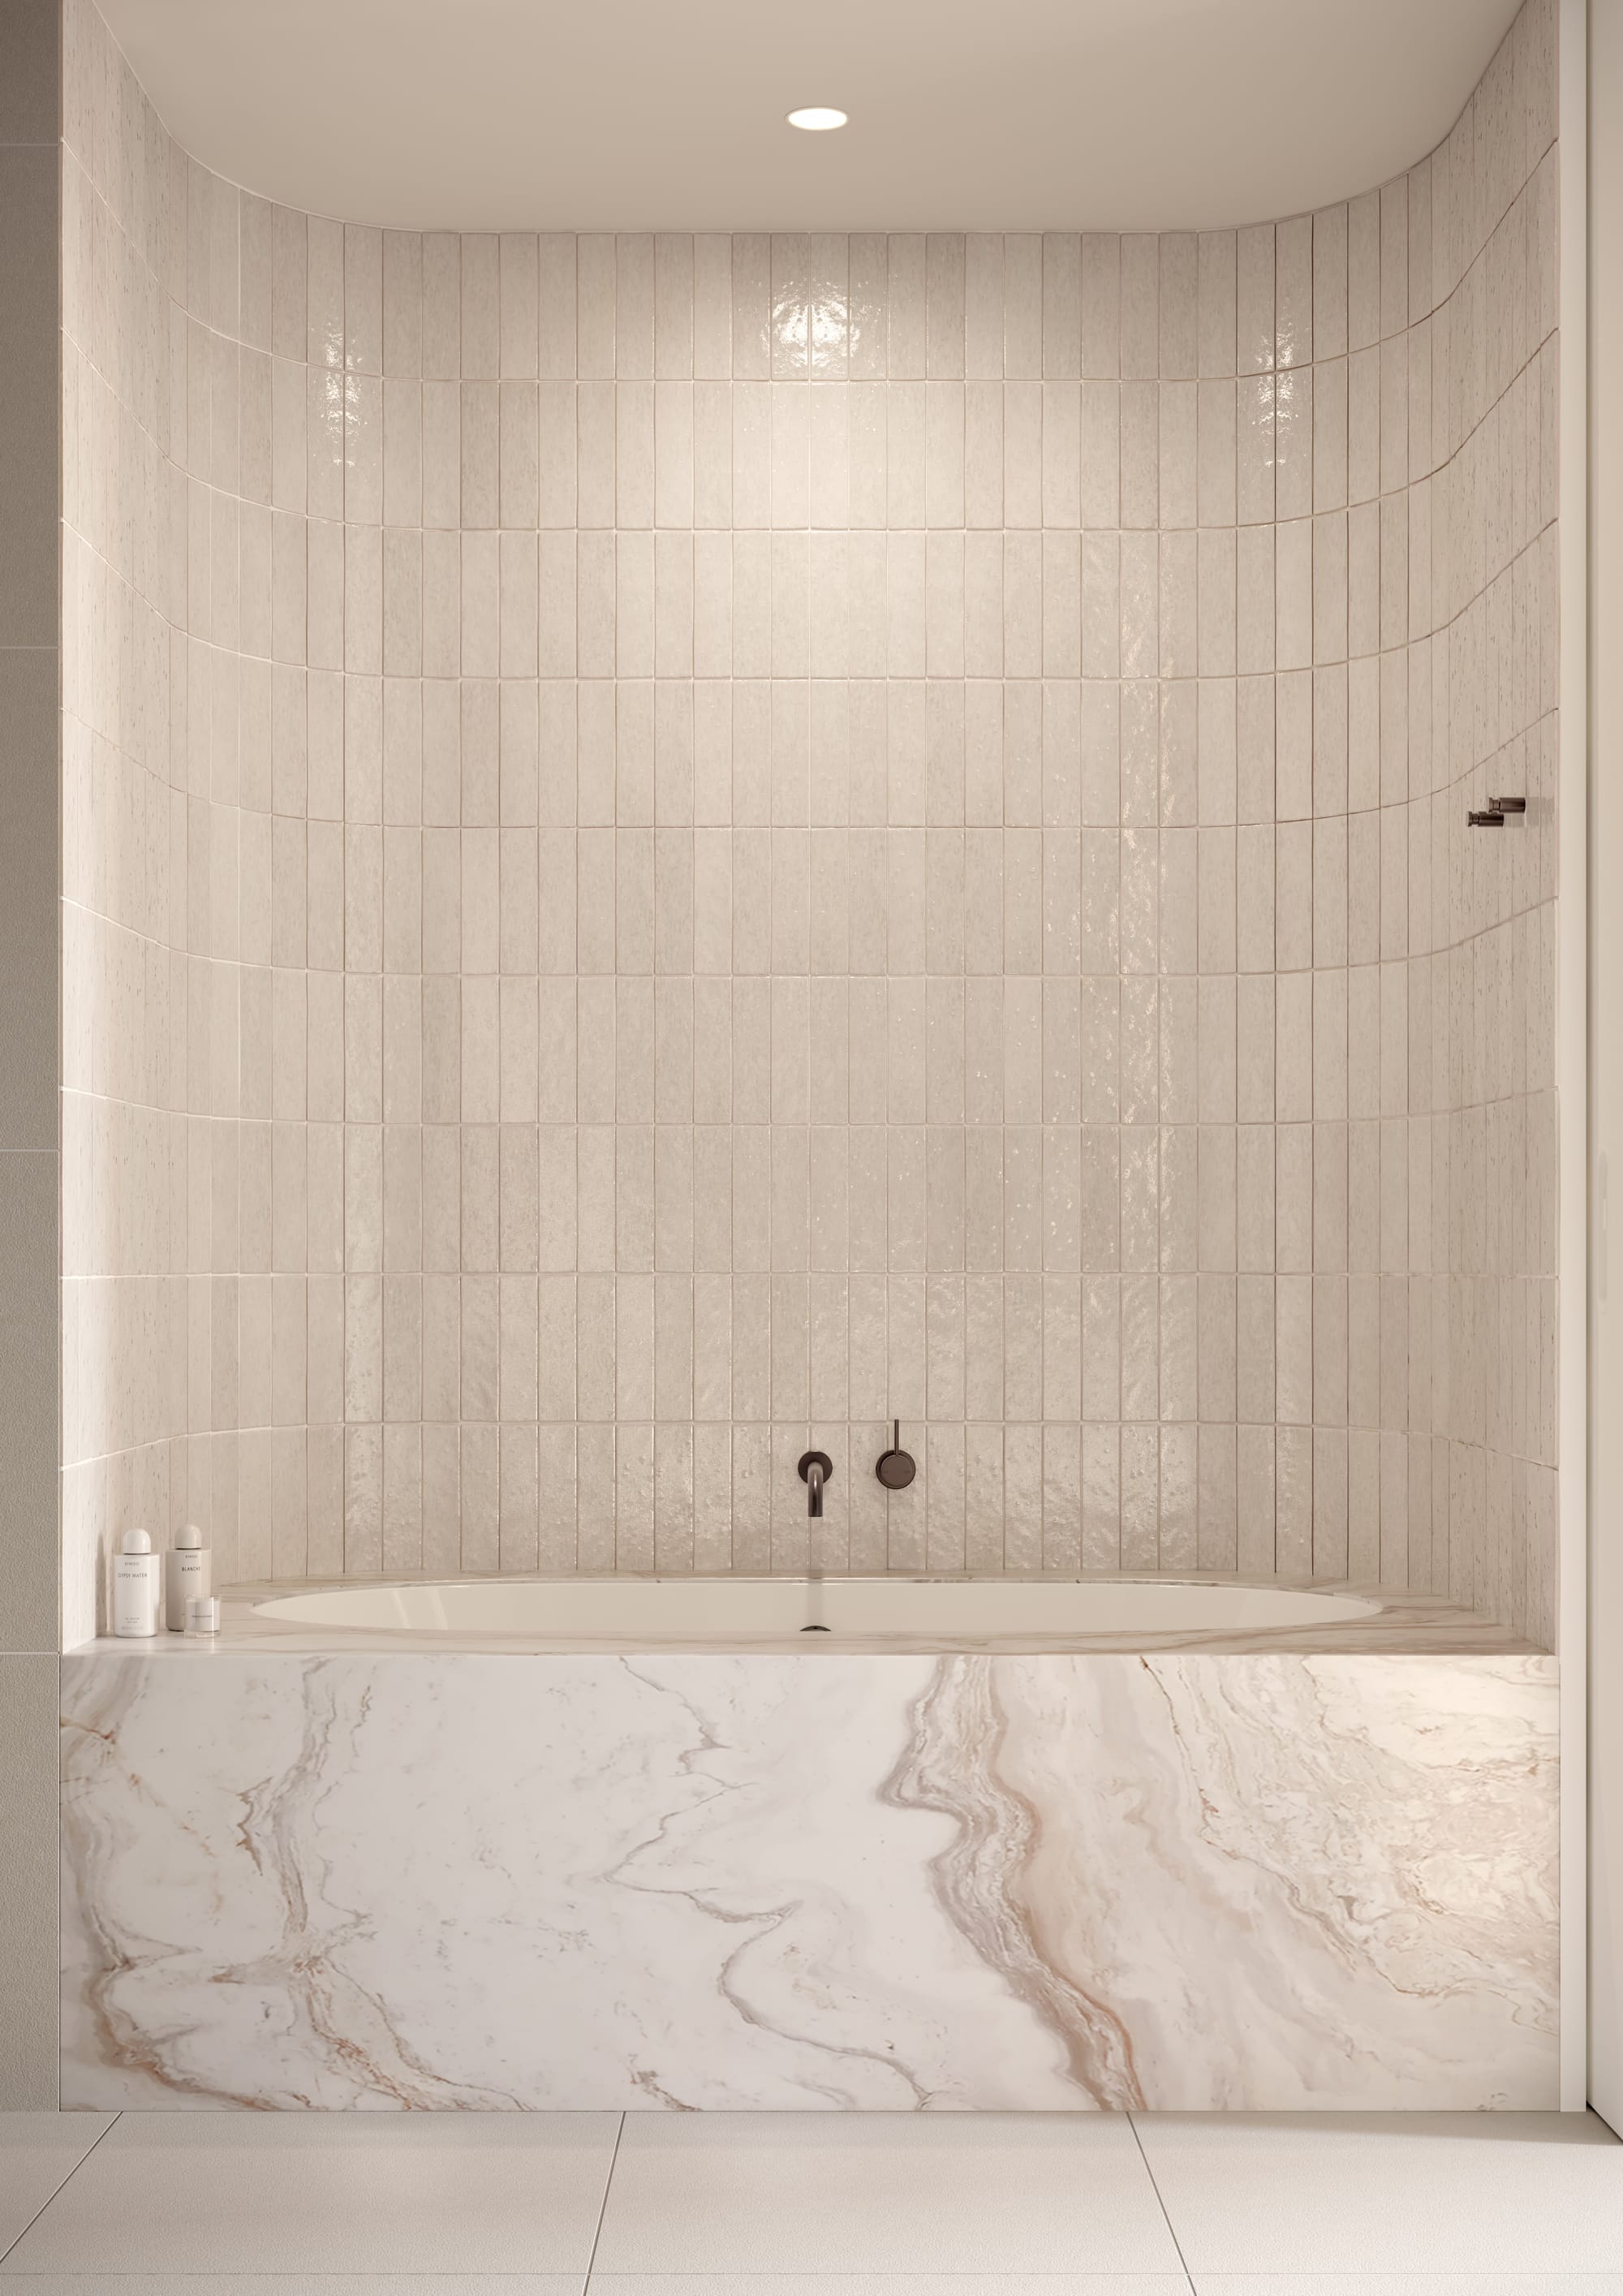 Sculpt Hawthorn by Mim Design, Parallel Workshop and Jack Merlo. Render copyright of Studio Piper. Bath encased in marble. Textured subway tiles on walls. Organically curved walls. 